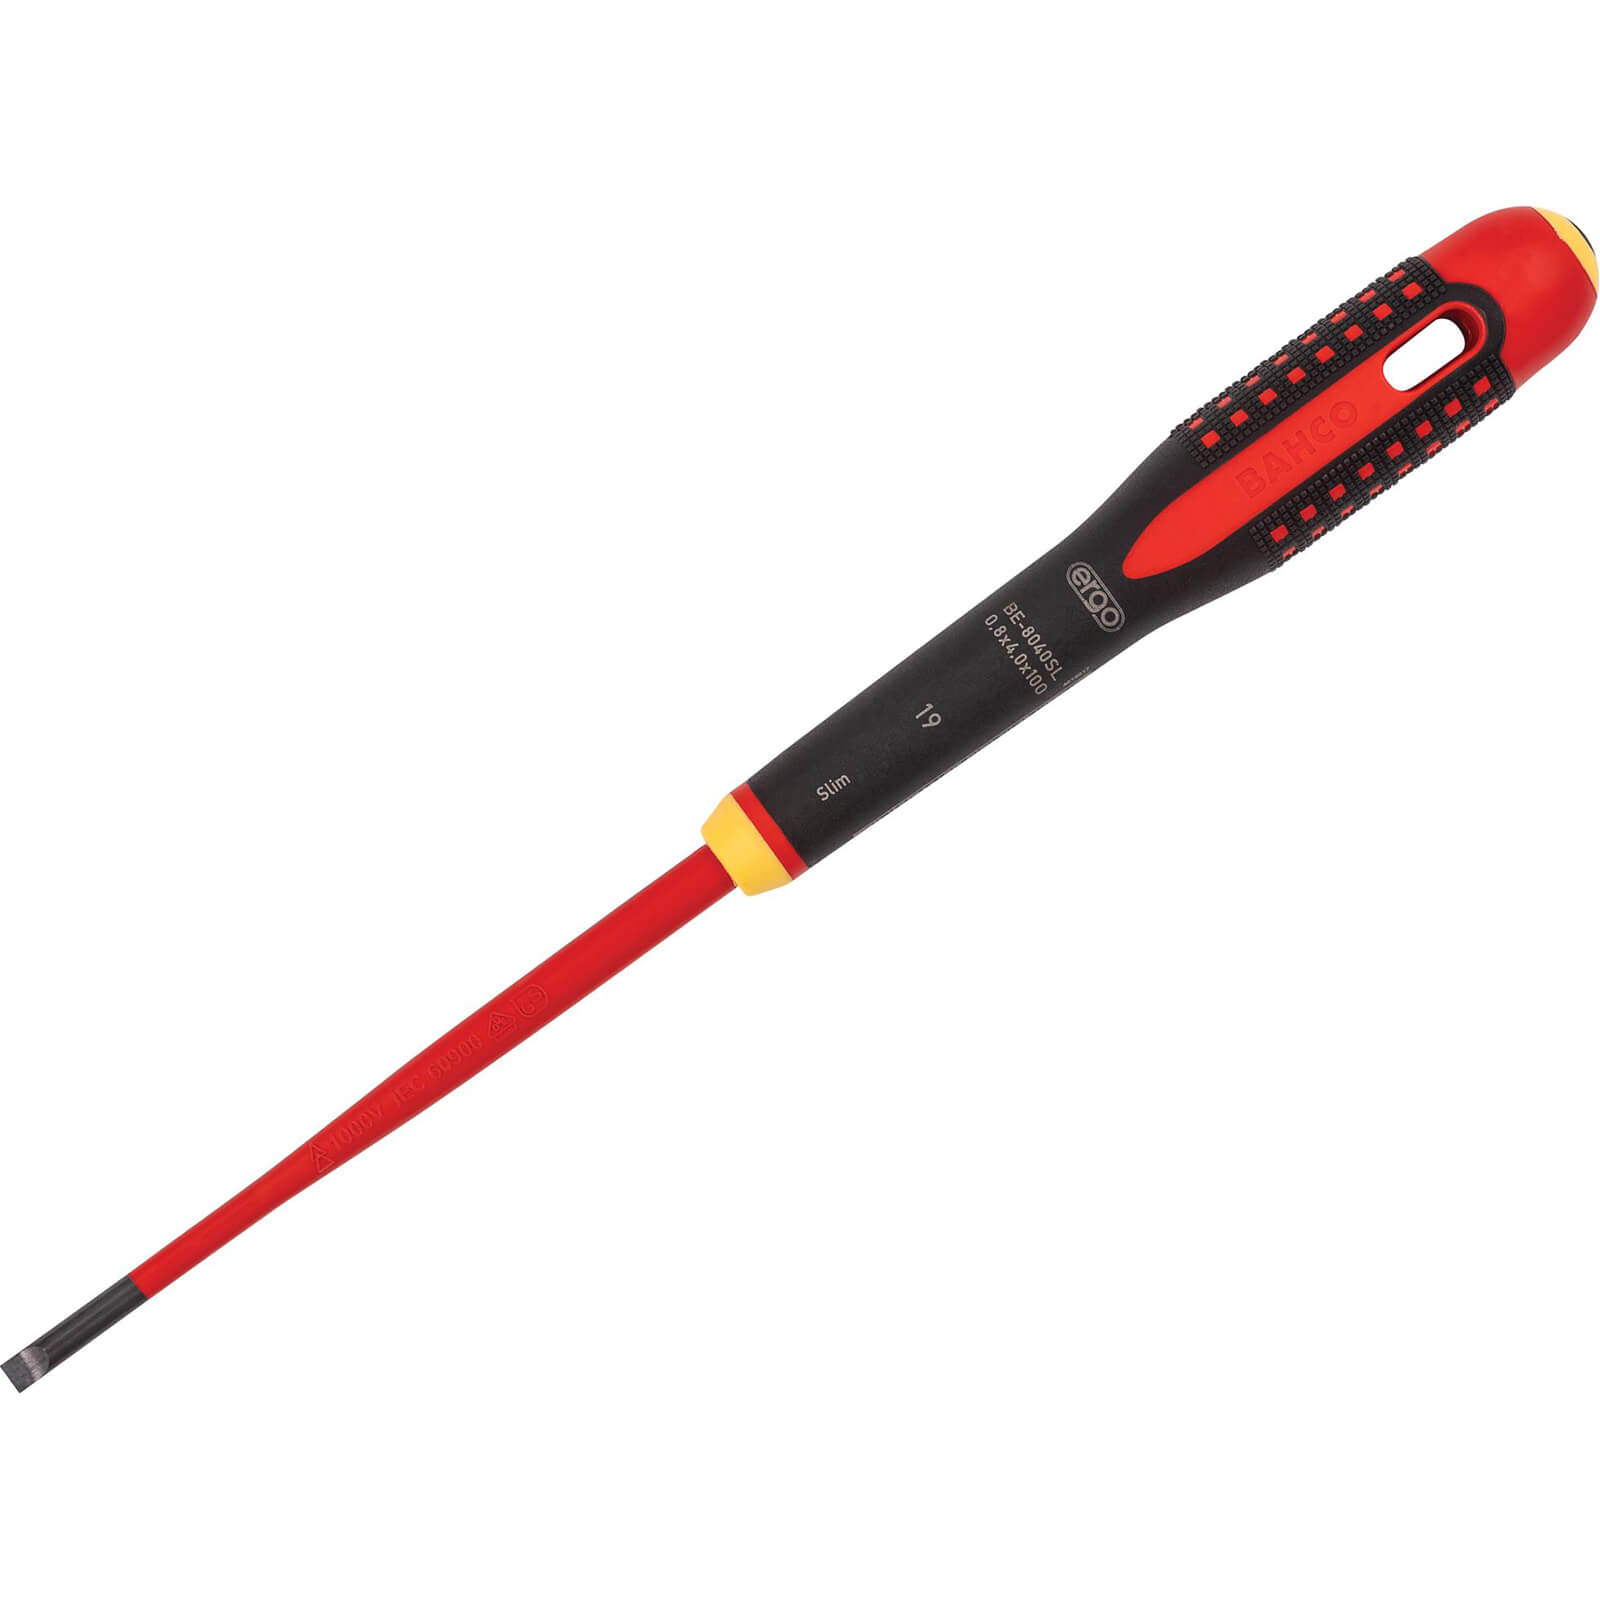 Photo of Bahco Ergo Slim Vde Insulated Slotted Screwdriver 4mm 100mm